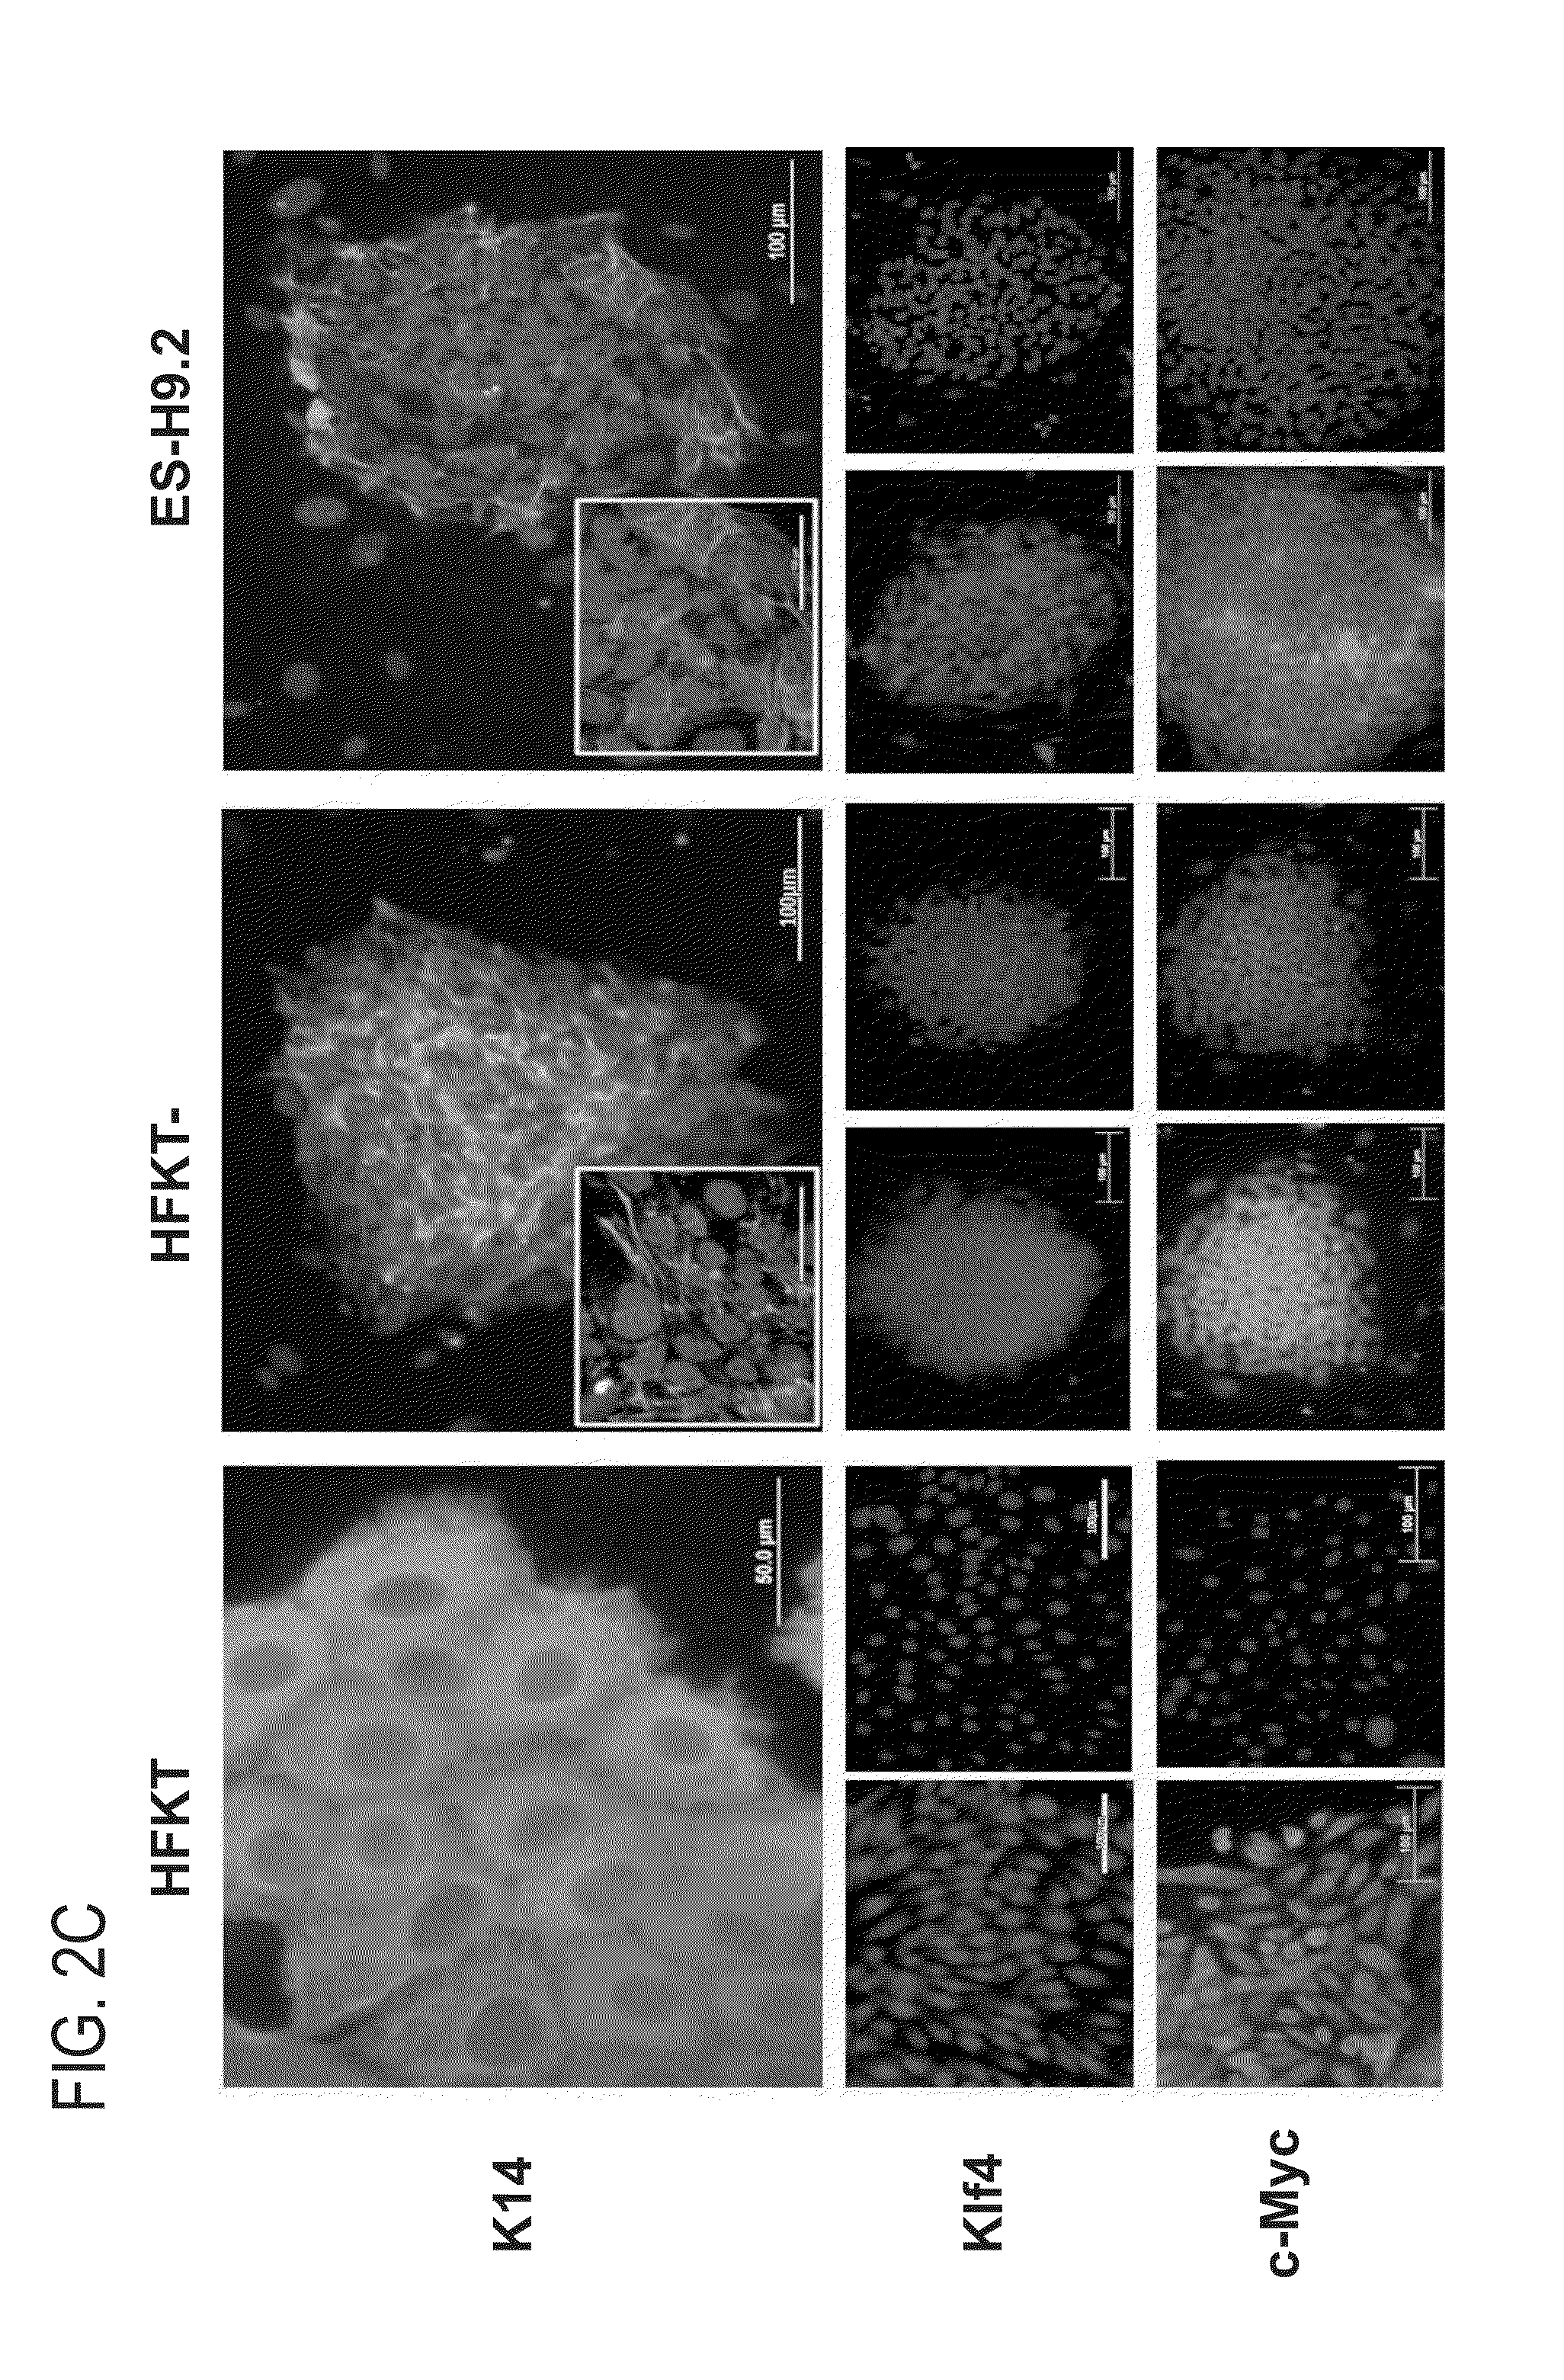 Method for generating induced pluripotent stem cells from keratinocytes derived from plucked hair follicles